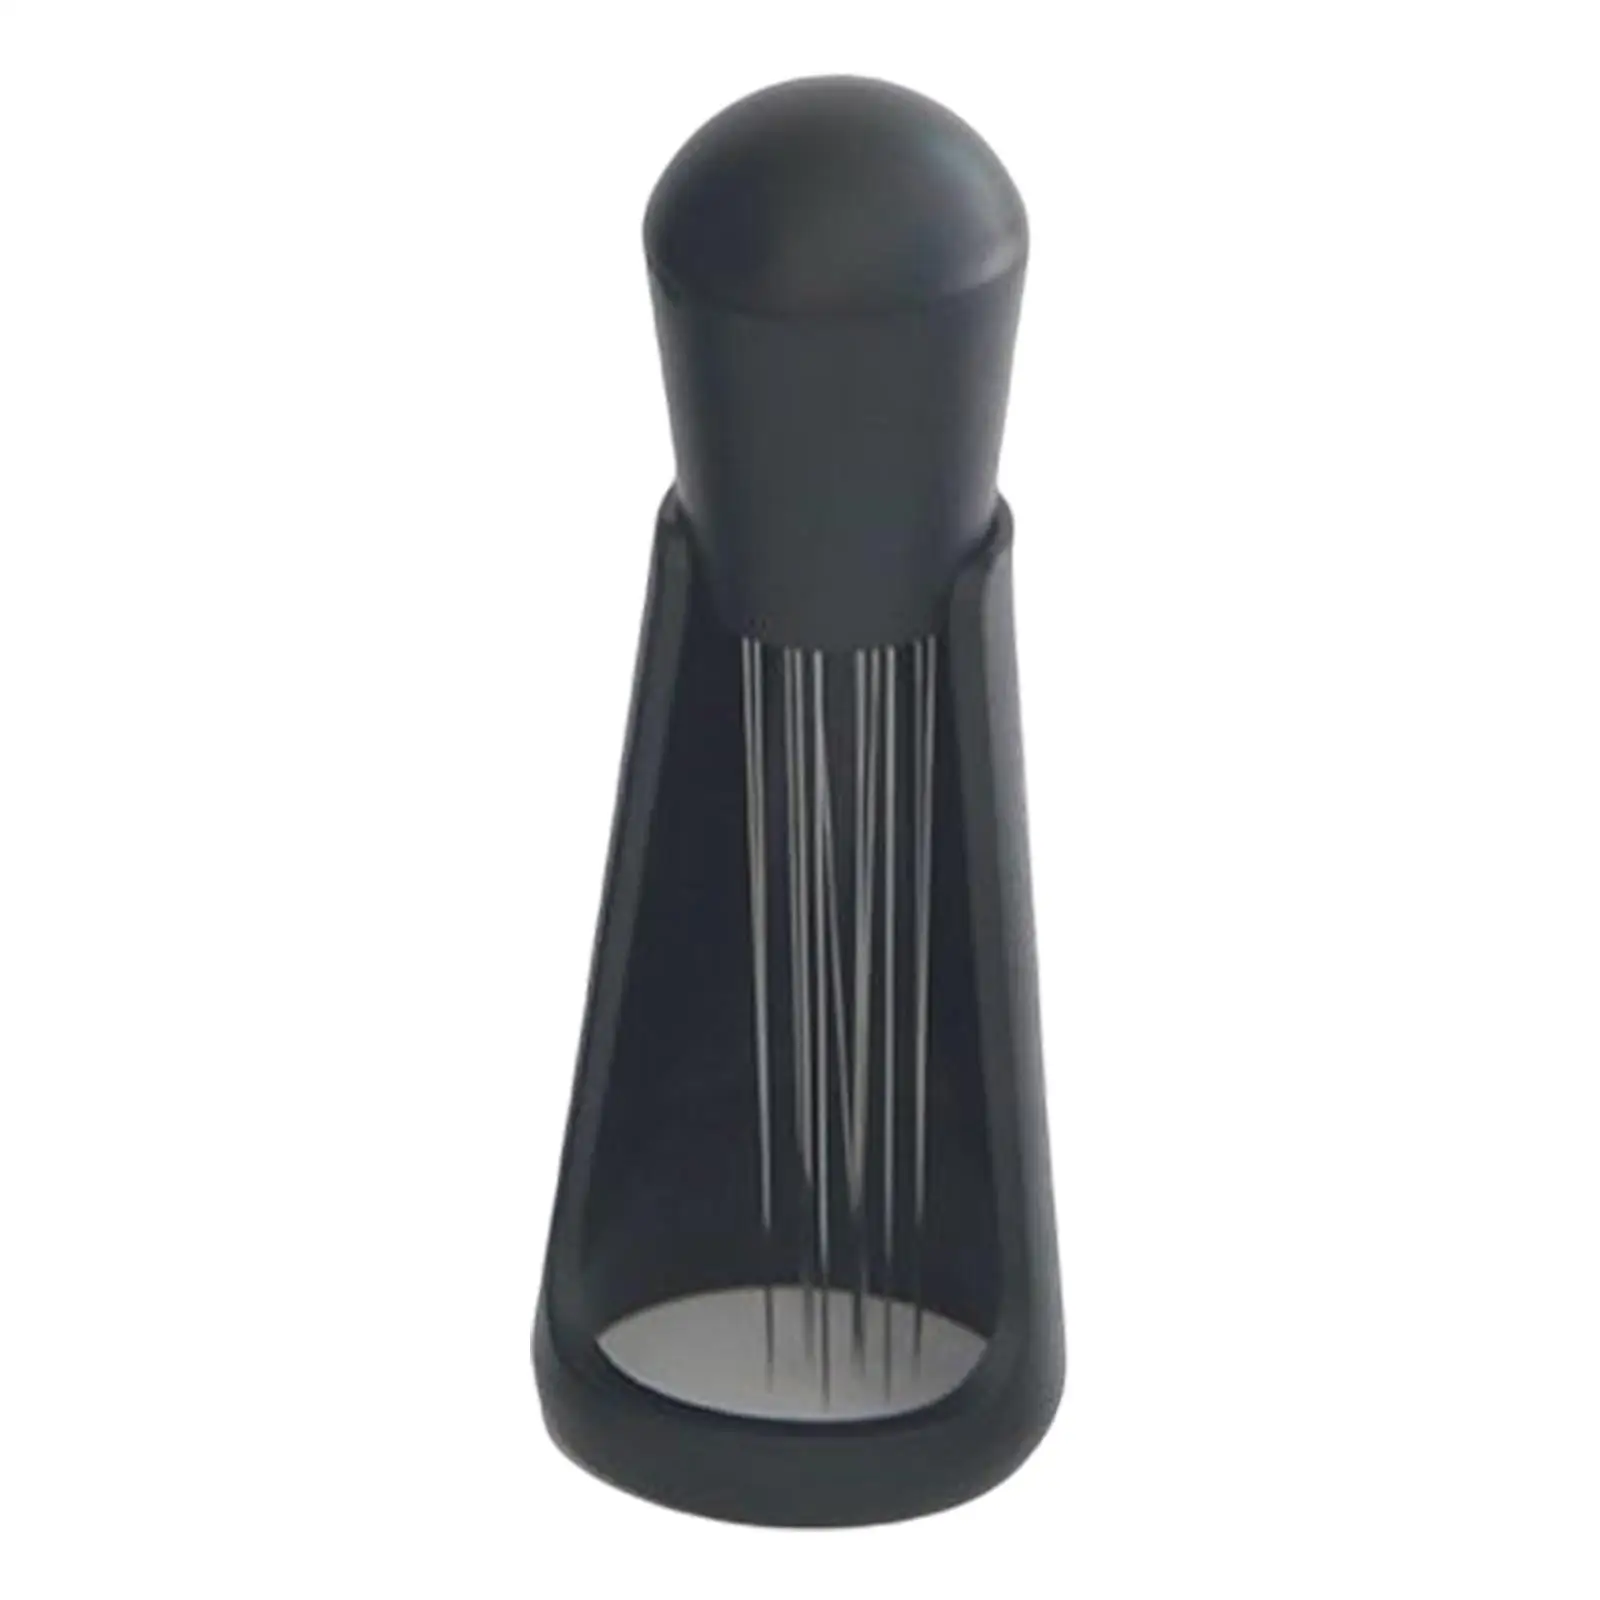 Coffee Stirring Tamper with Base Accessories Kitchen Gadgets Premium Material Office, Coffee Shop Use ,Black Practical